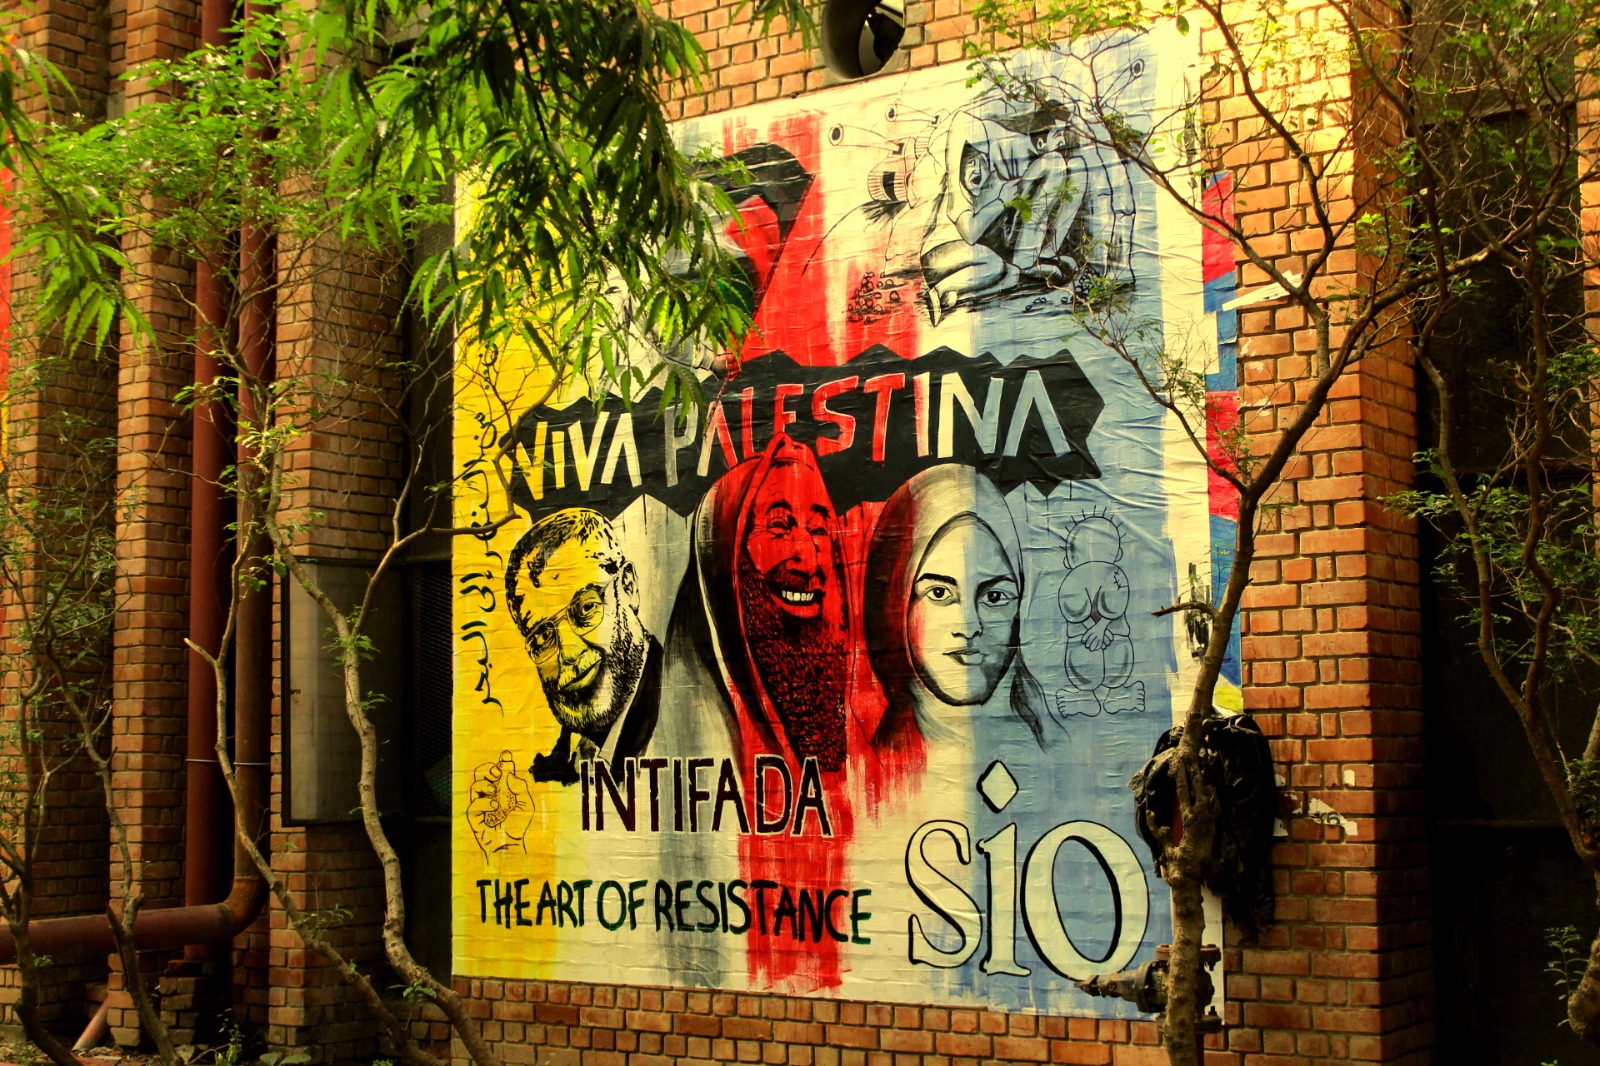 Artistic Poster at JNU to Convey message of peace, harmony, communal amity, deriding oppression and injustice